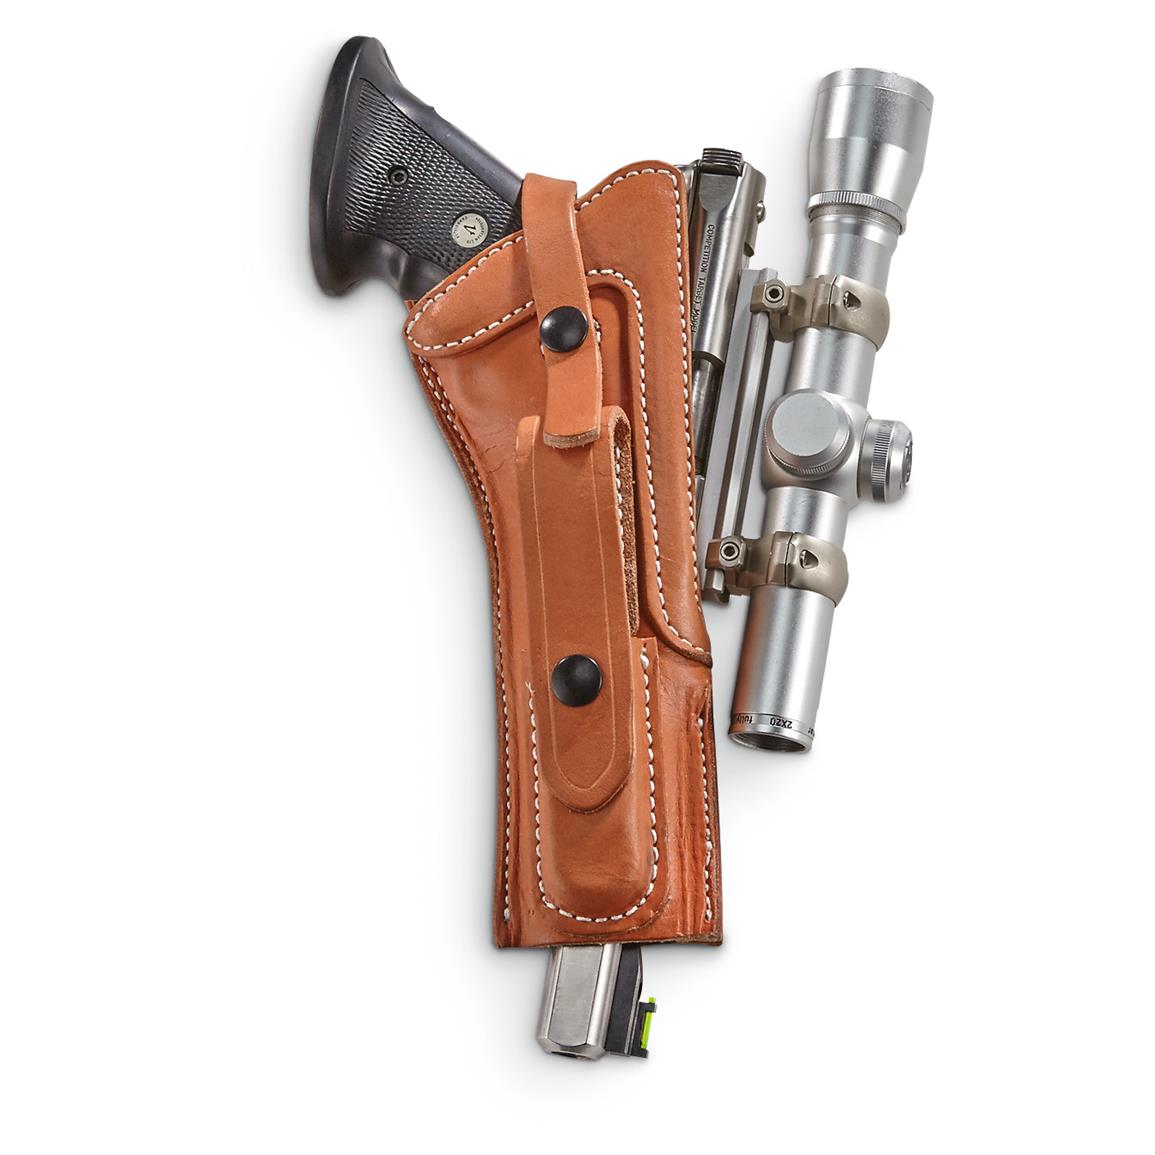 Bandolier 6" Scoped Holster for RUGER,SMITH & WESSON Revolvers